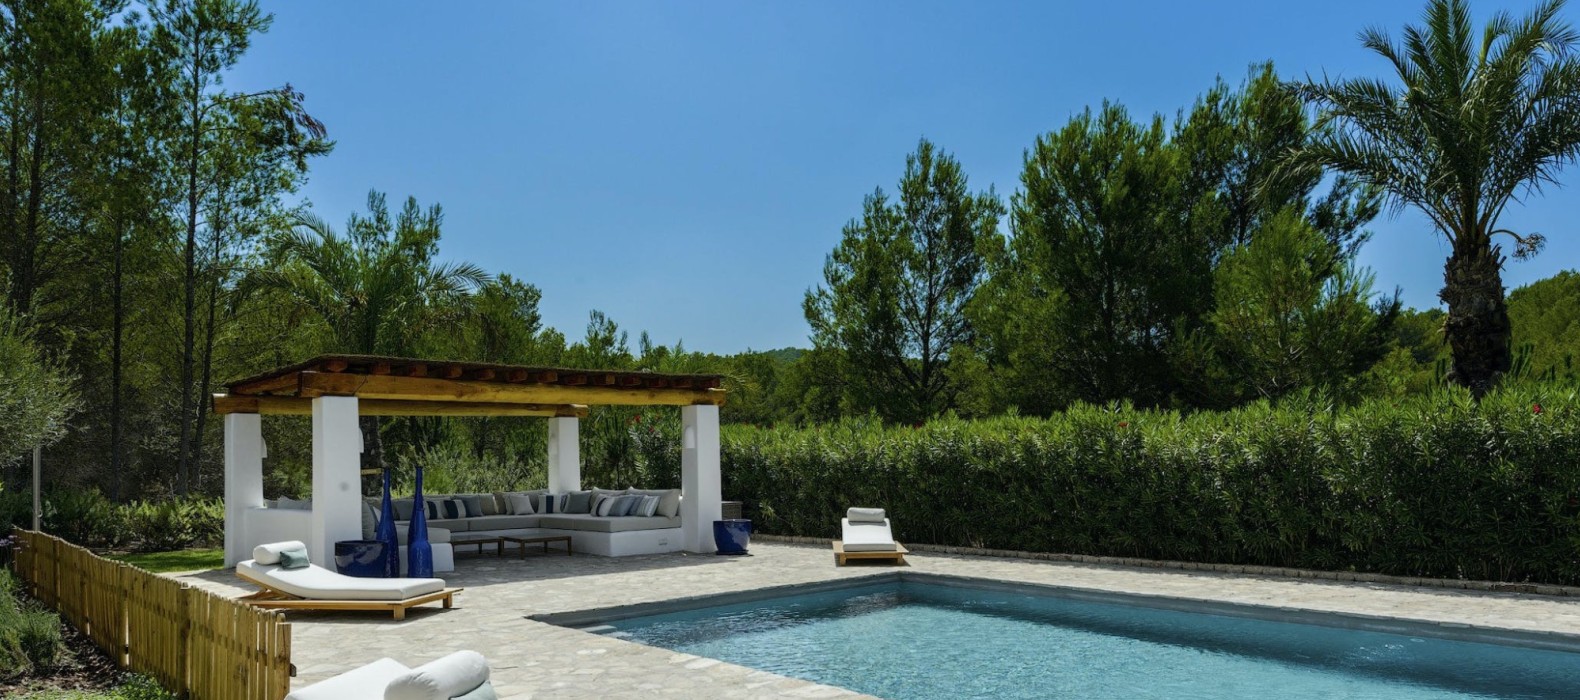 Exterior pool and chill area of Villa Blissful Life in Ibiza